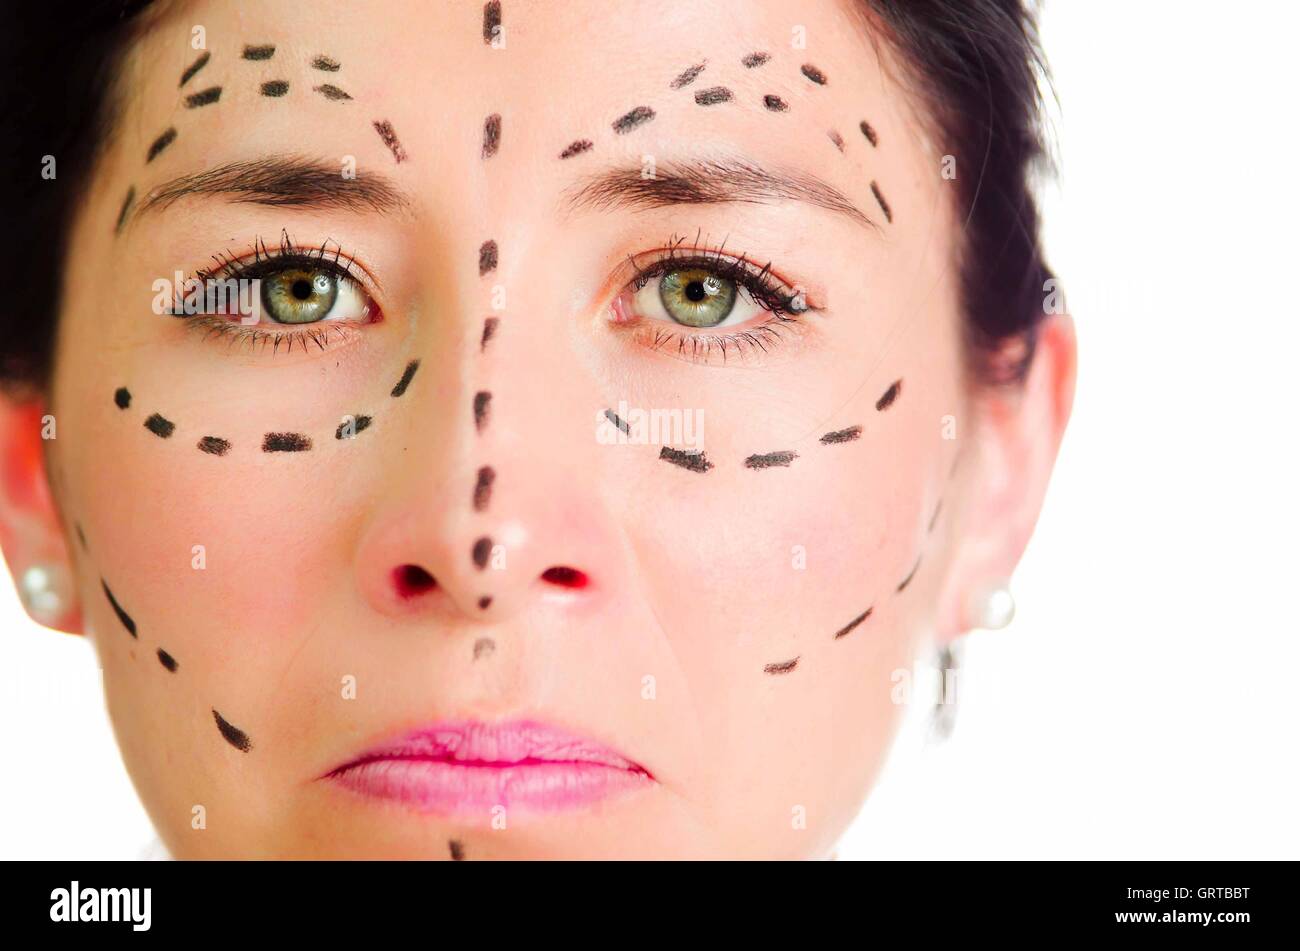 Closeup headshot caucasian woman with dotted lines drawn around face looking into camera, skeptical facial expression, preparing cosmetic surgery Stock Photo